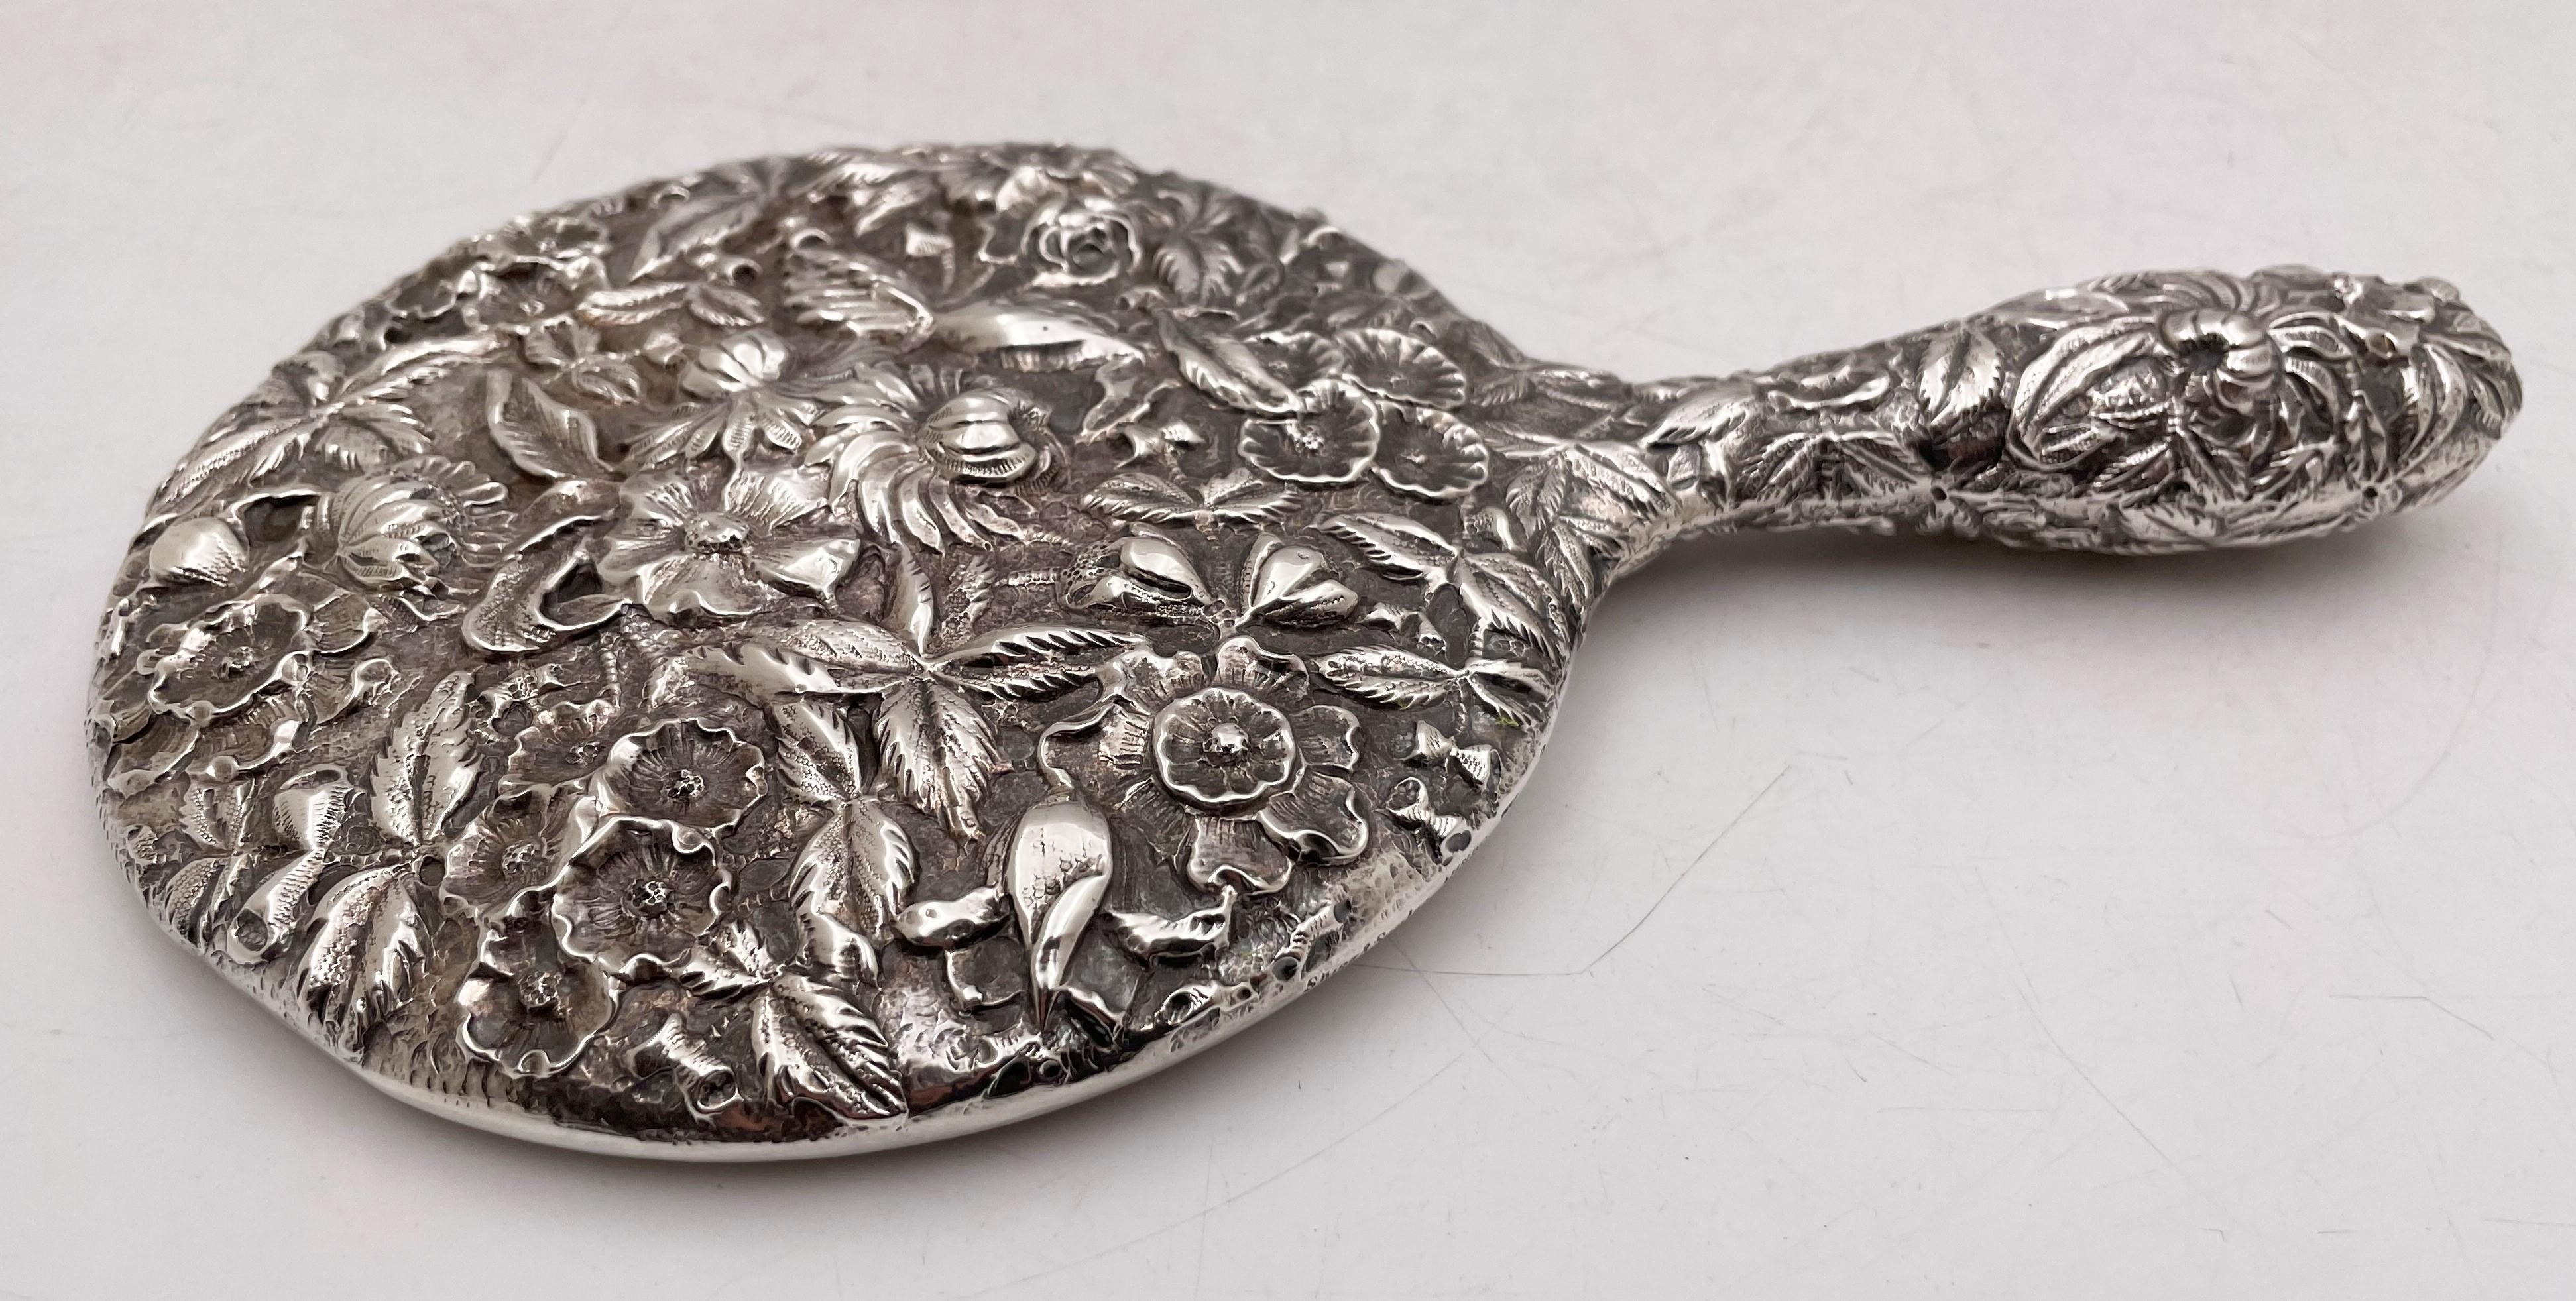 S. Kirk & Son, sterling silver and glass hand mirror from the 19th century, beautifully adorned with repousse floral motifs, measuring 9 3/4'' in length by in 5 7/8'' width by 5/8'' in depth, and bearing hallmarks as shown. 

Baltimore’s prominent